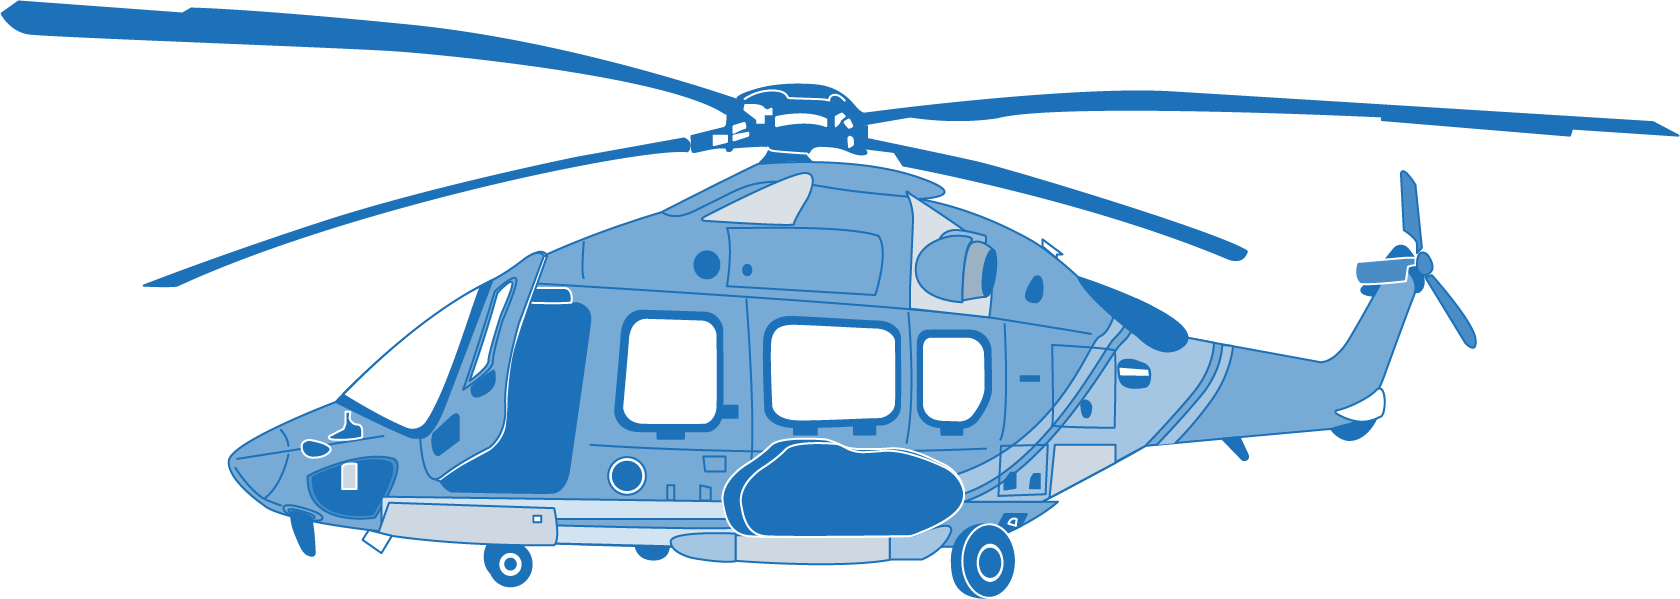 Helicopter containing the aerial radiation monitoring system